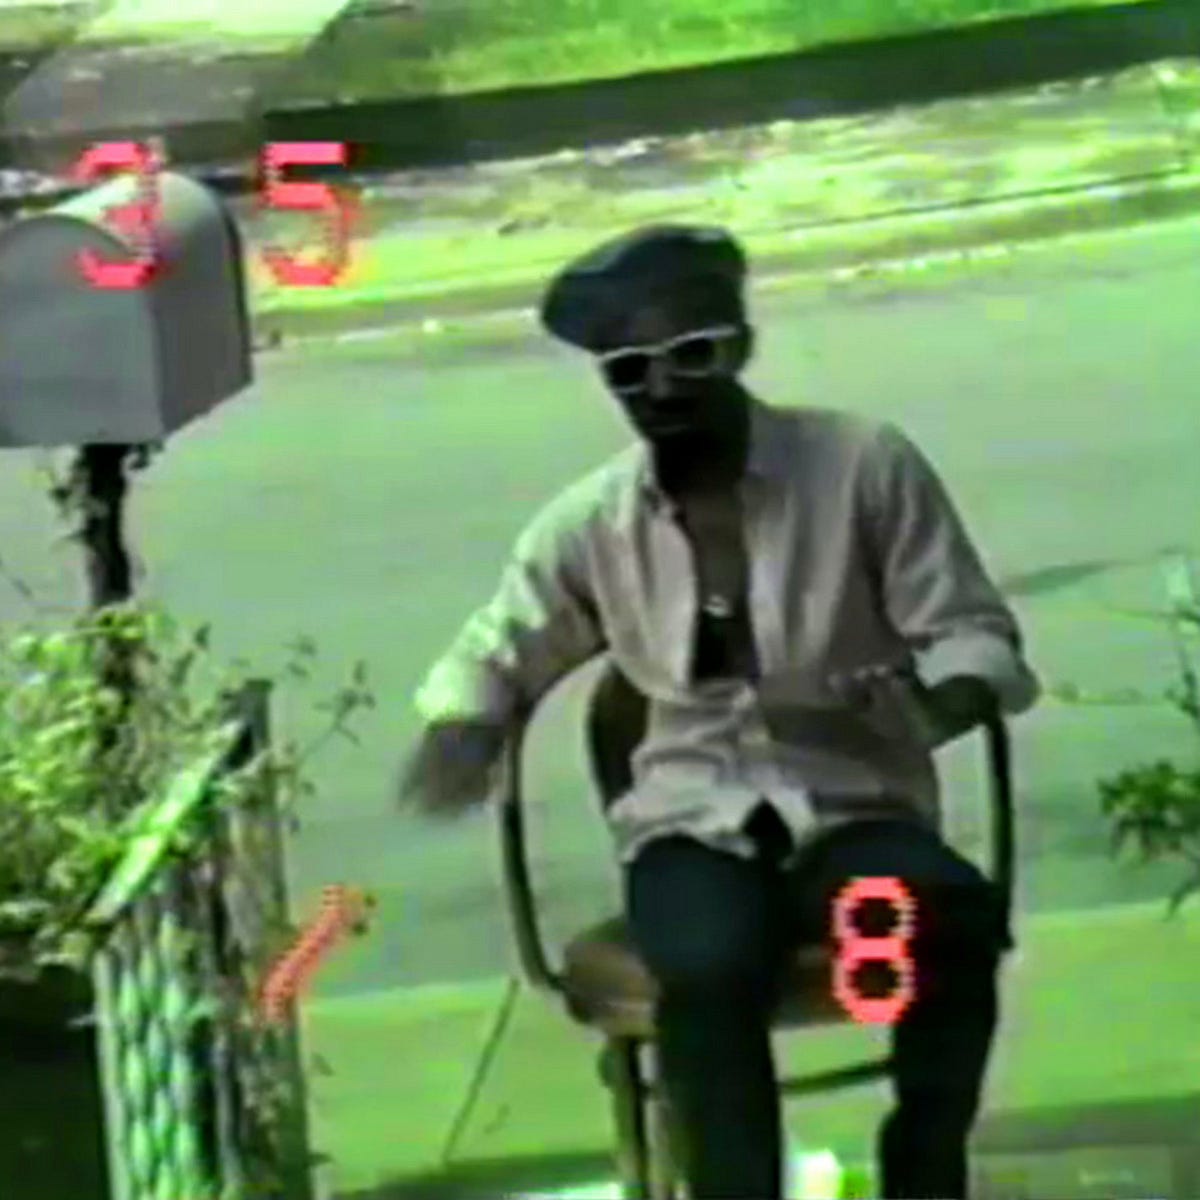 still image from a green-gelled VHS video, featuring a man in a beret and white-framed sunglasses and an unbuttoned white shirt on, arms in motion but seated in a chair near a sidewalk mailbox. The numbers 3, 5, and 8 appear in LCD-style red formatting, perhaps a date stamp from the camcorder.